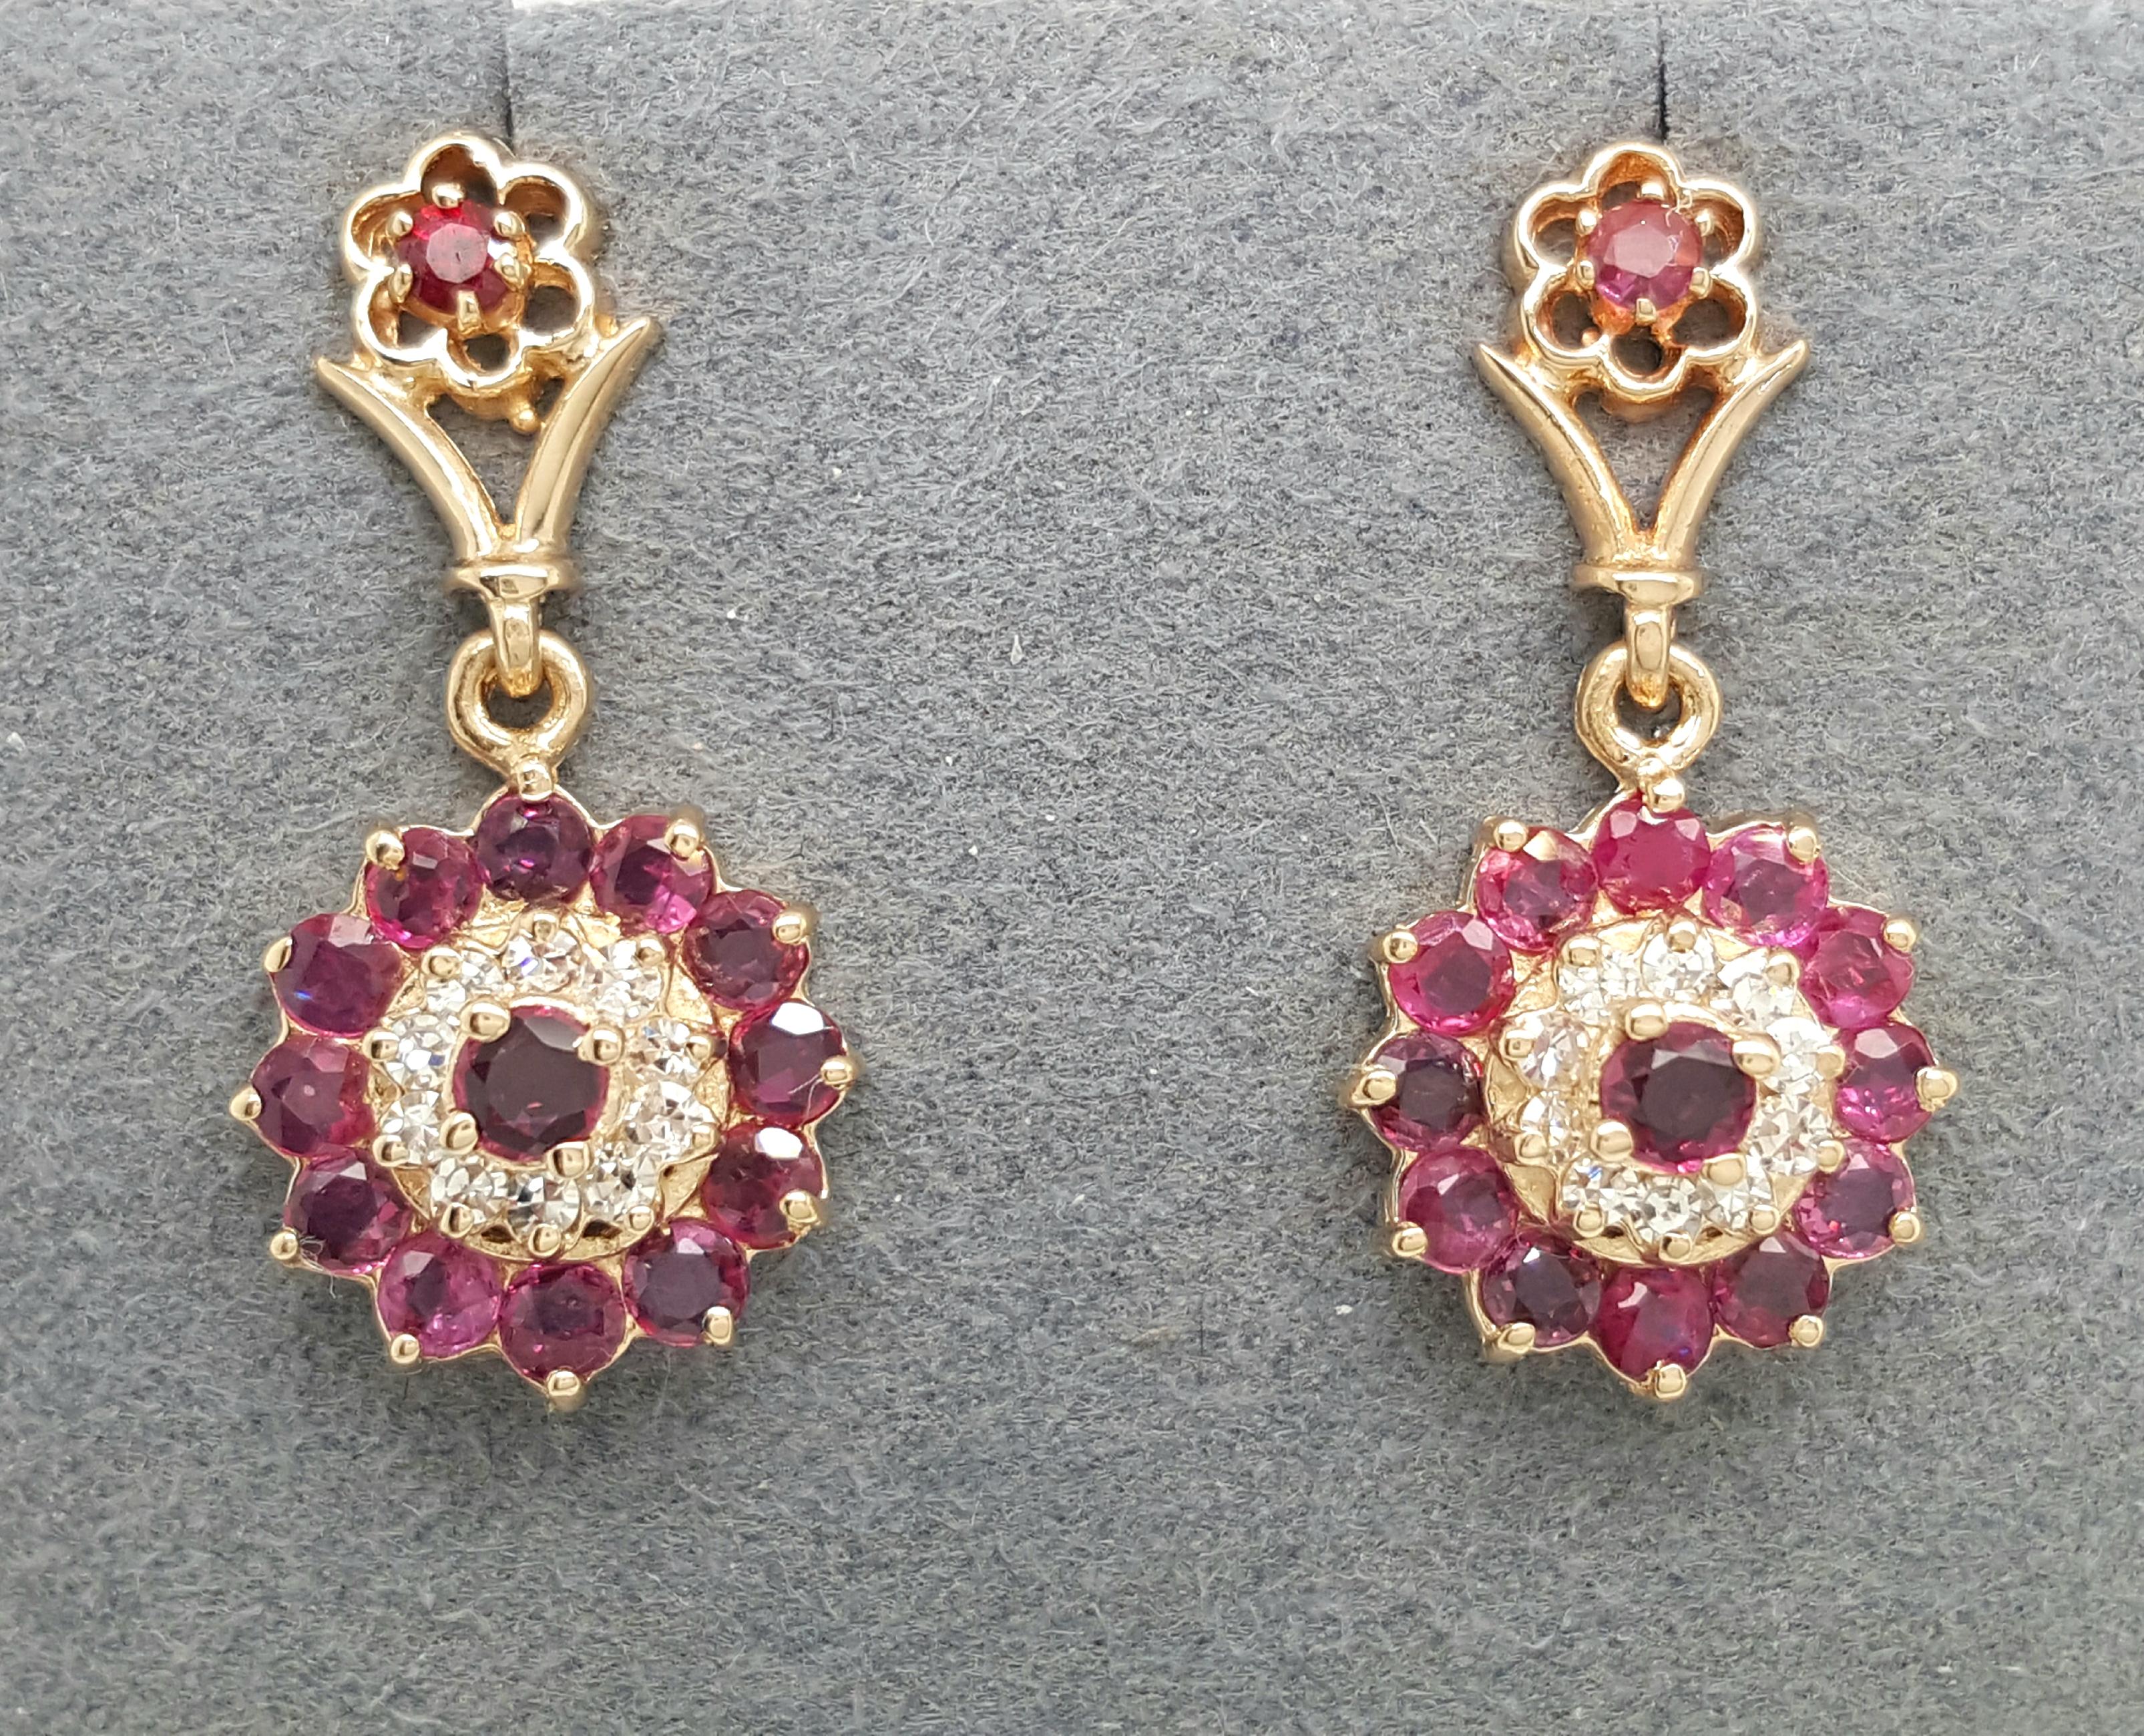 Retro 14 Karat Yellow Gold Vintage Style Diamond and Ruby Double Halo Earrings For Sale